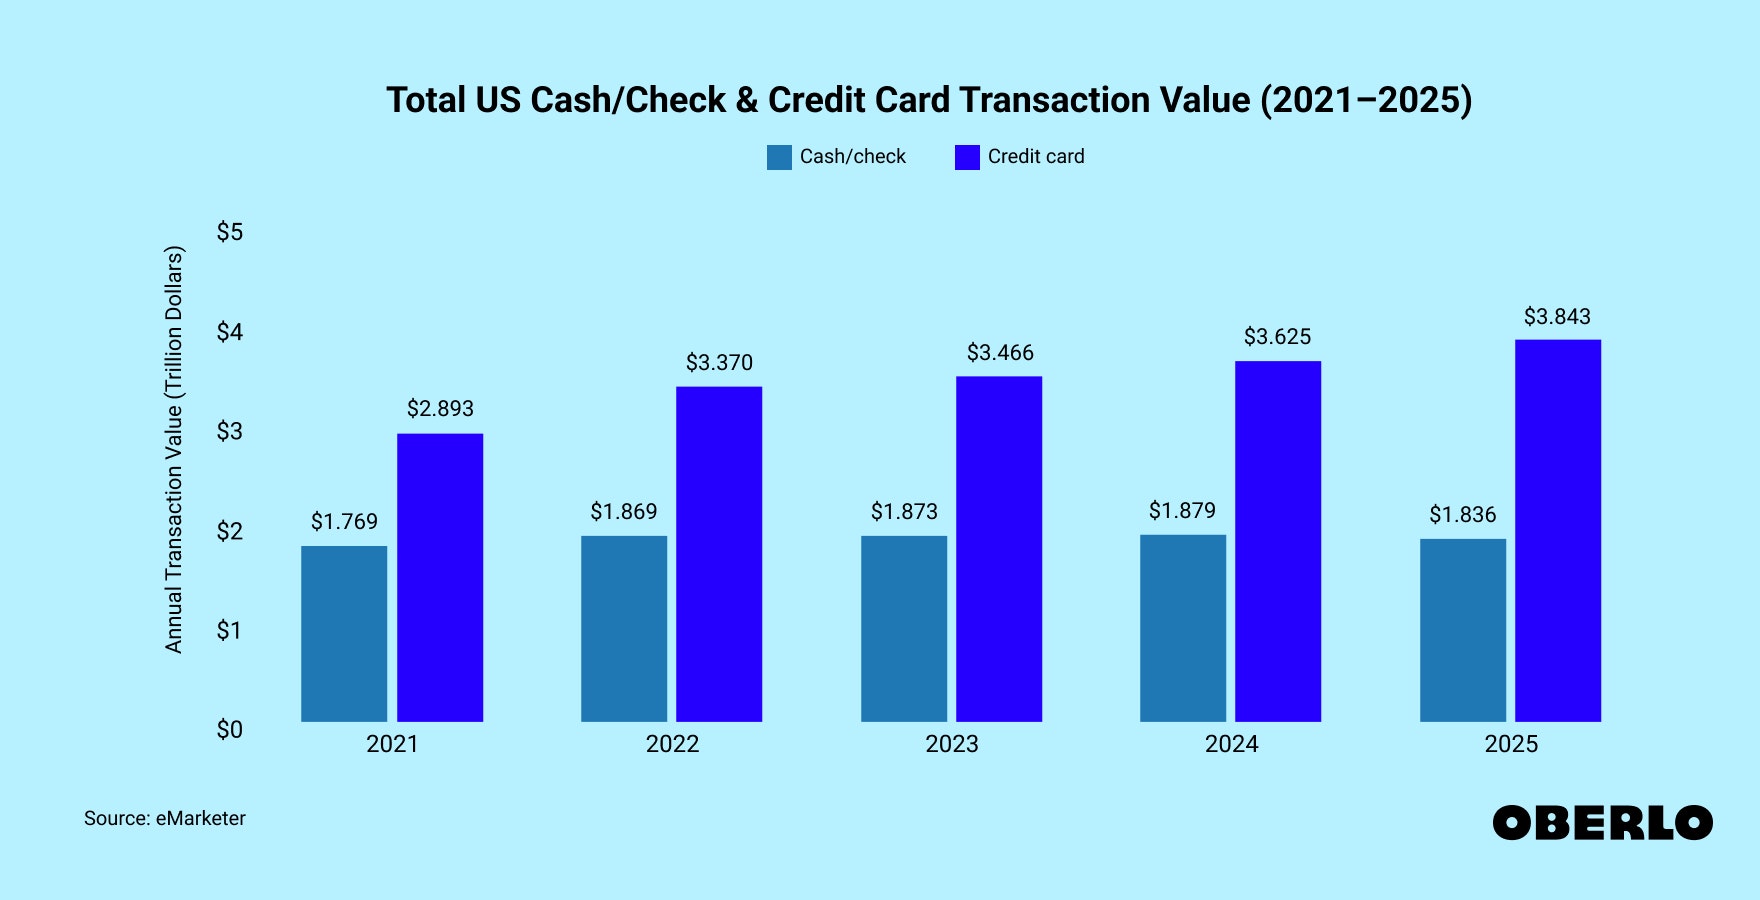 Chart showing the total US cash/check and credit card transaction value from 2021 to 2025